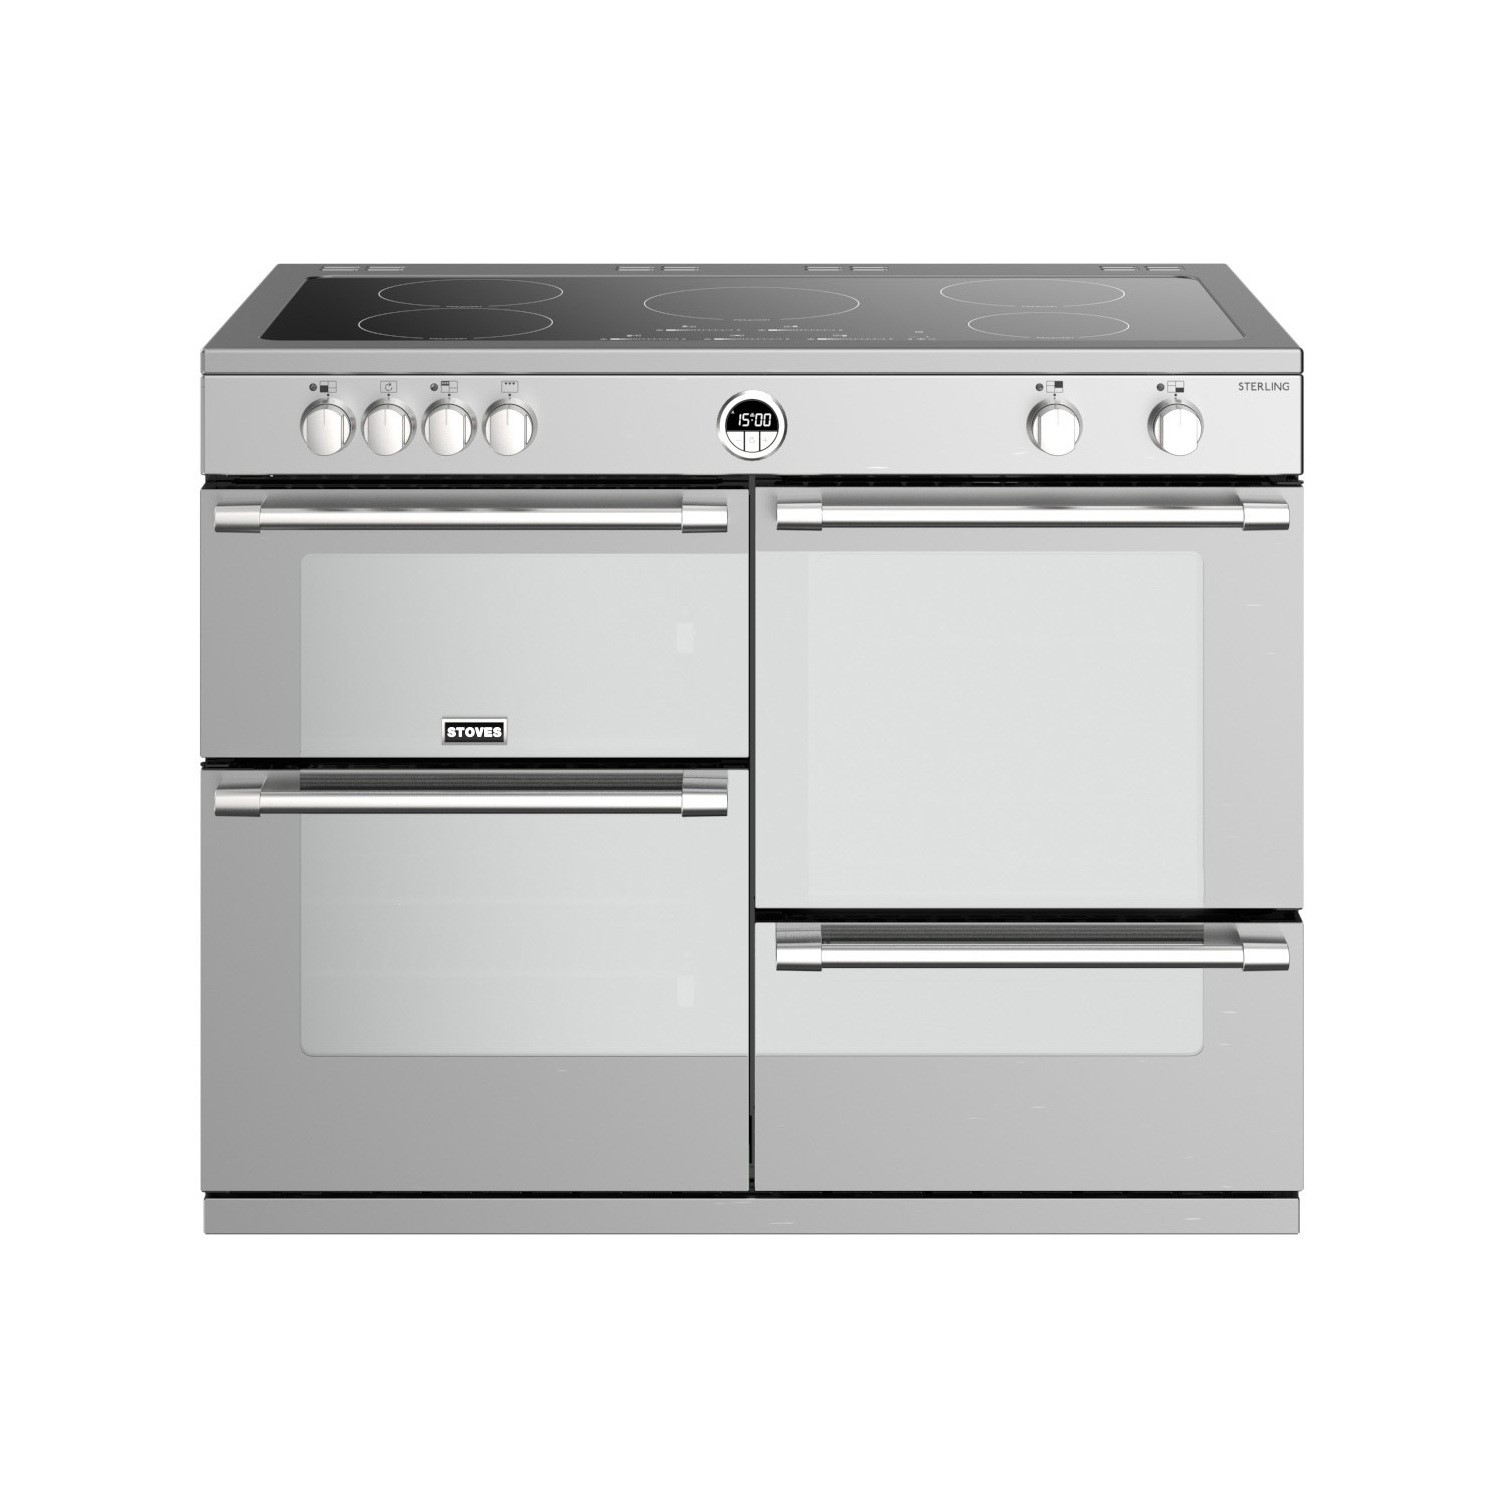 Stoves Sterling S1100Ei 110cm Electric Range Cooker With Induction Hob - Stainless Steel